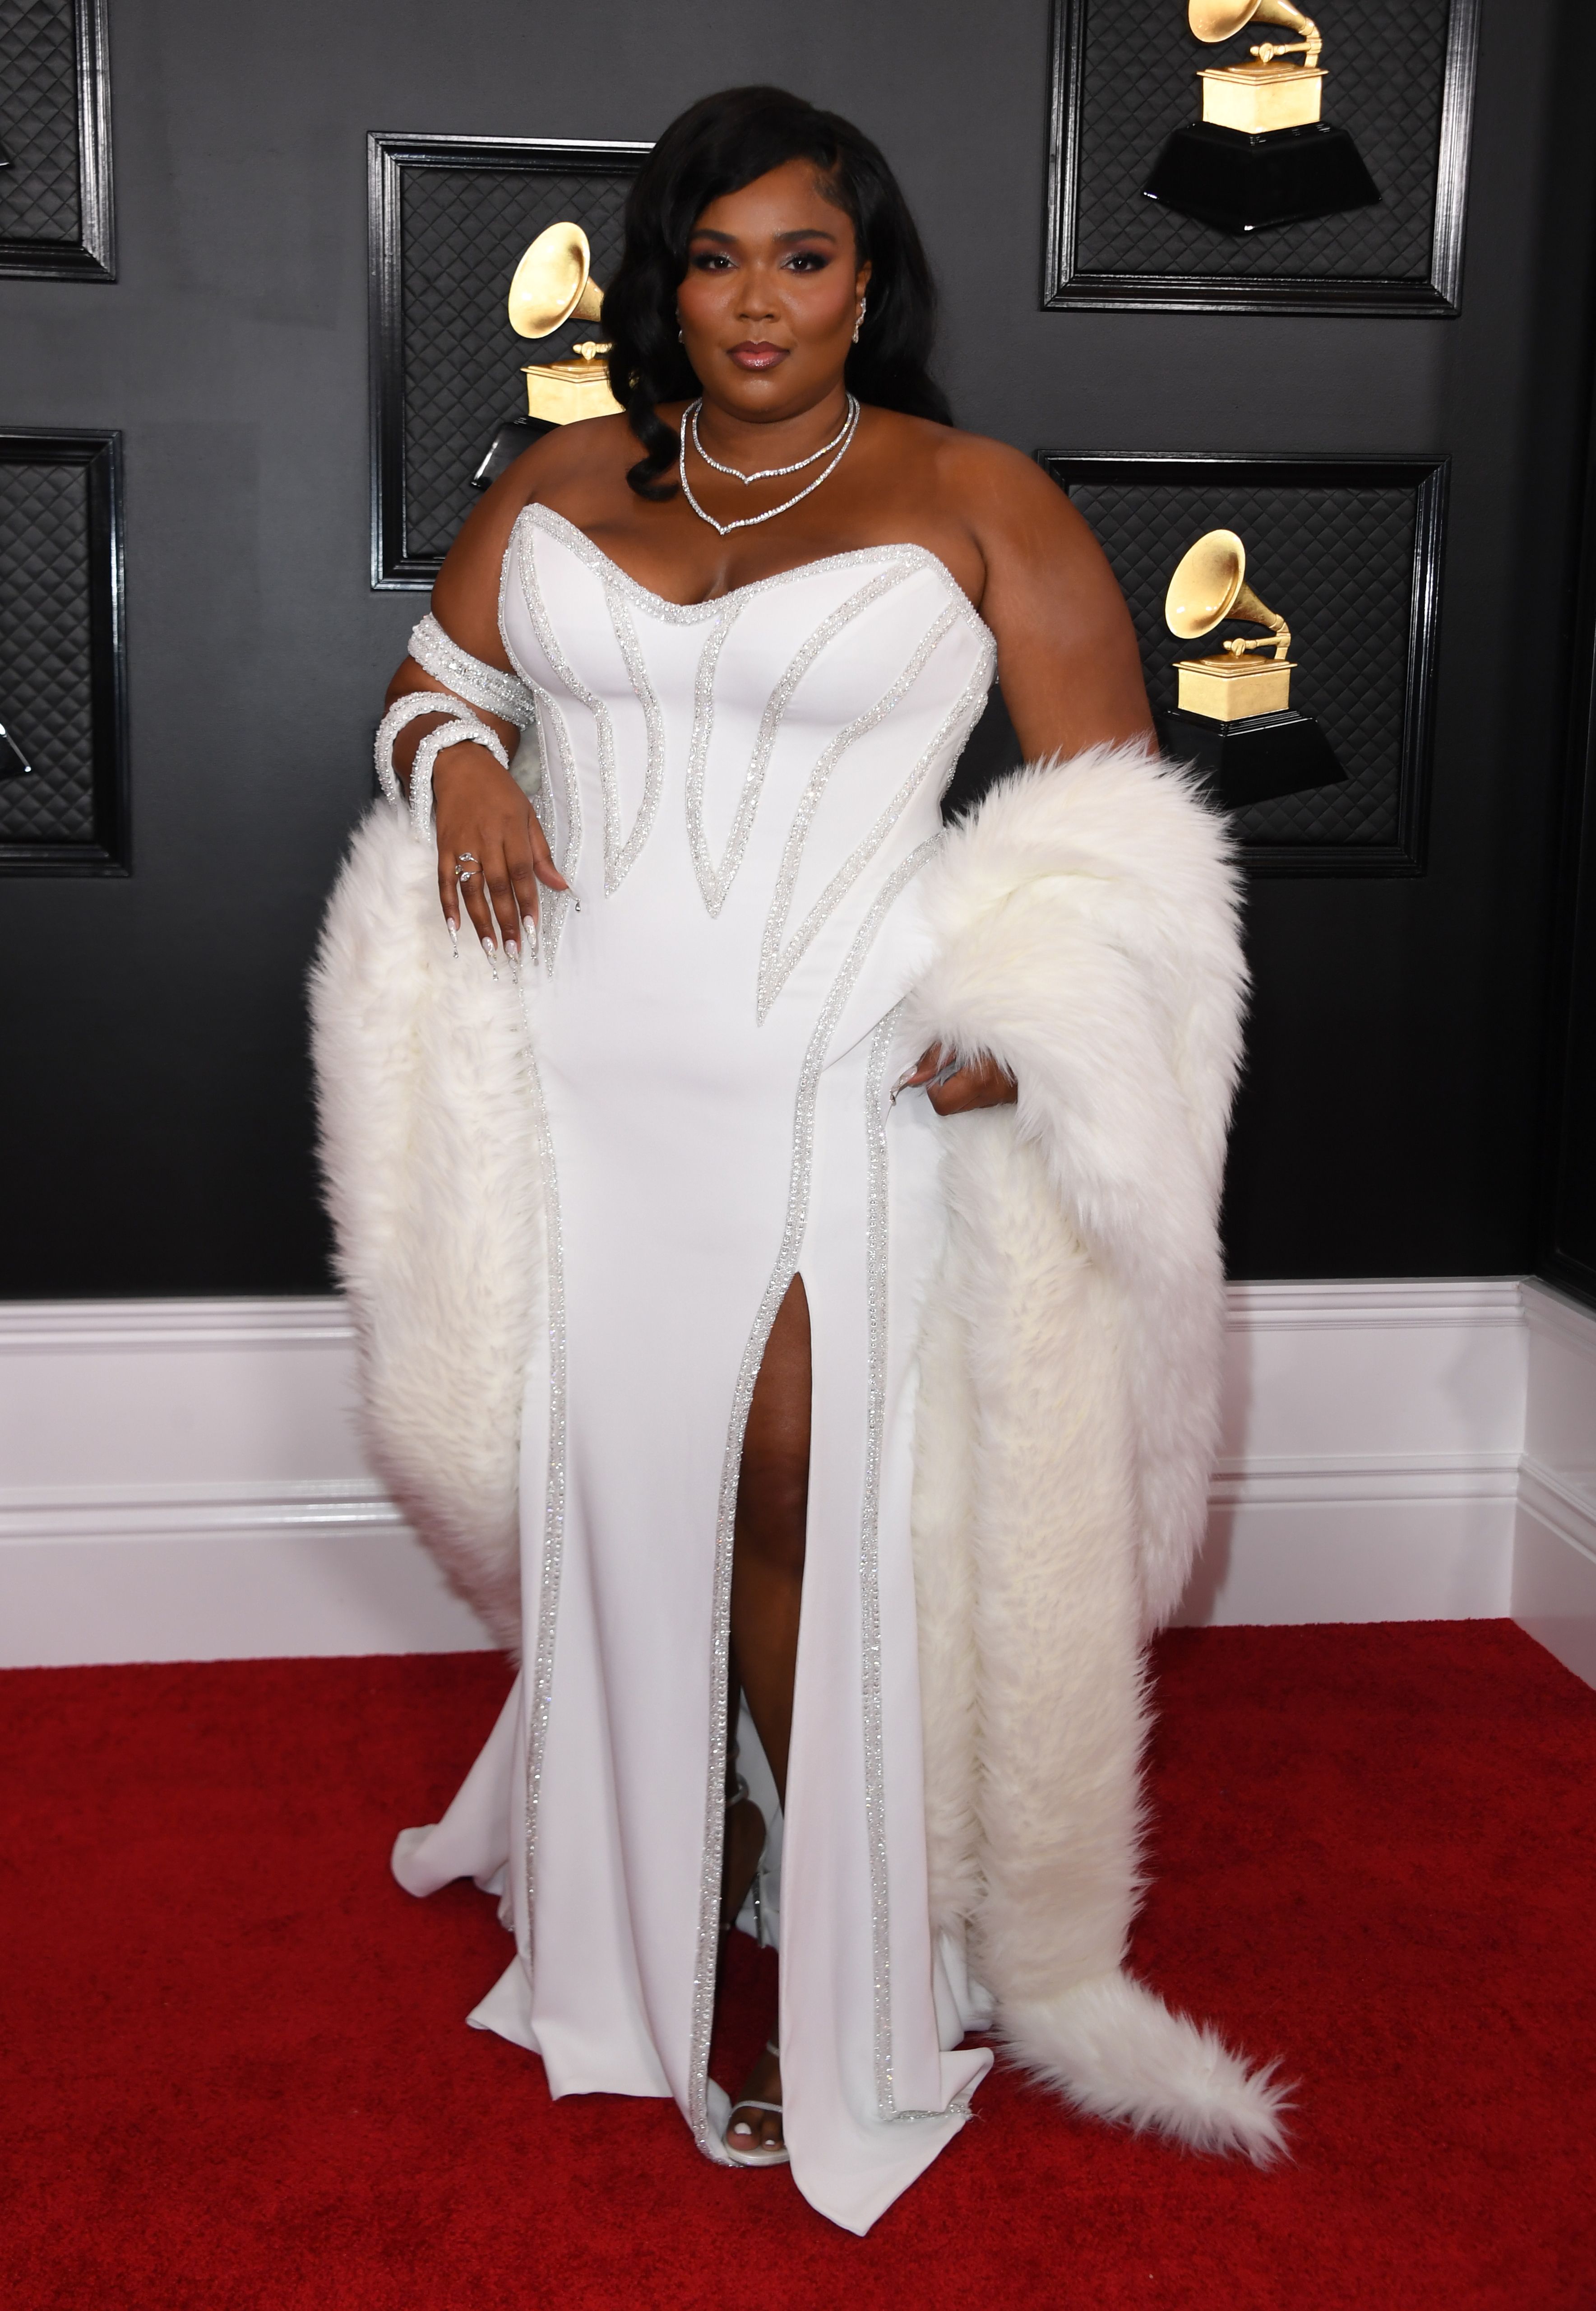 Lizzo hits the Grammys red carpet in whitehot gown